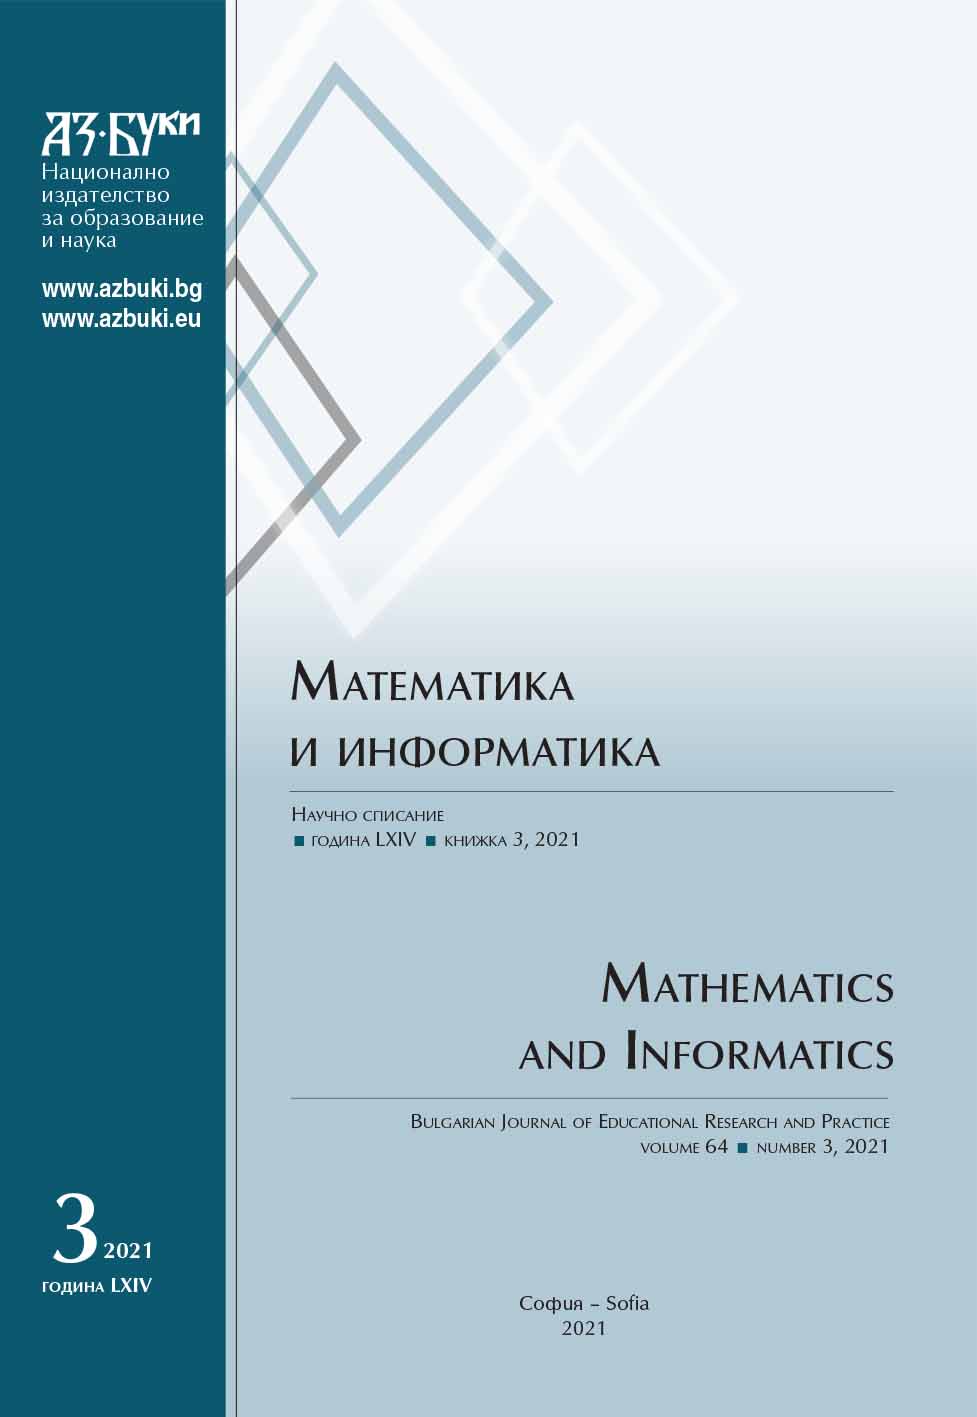 Some Problems in Engineering Education with Computer Science Profile During COVID-19 Cover Image